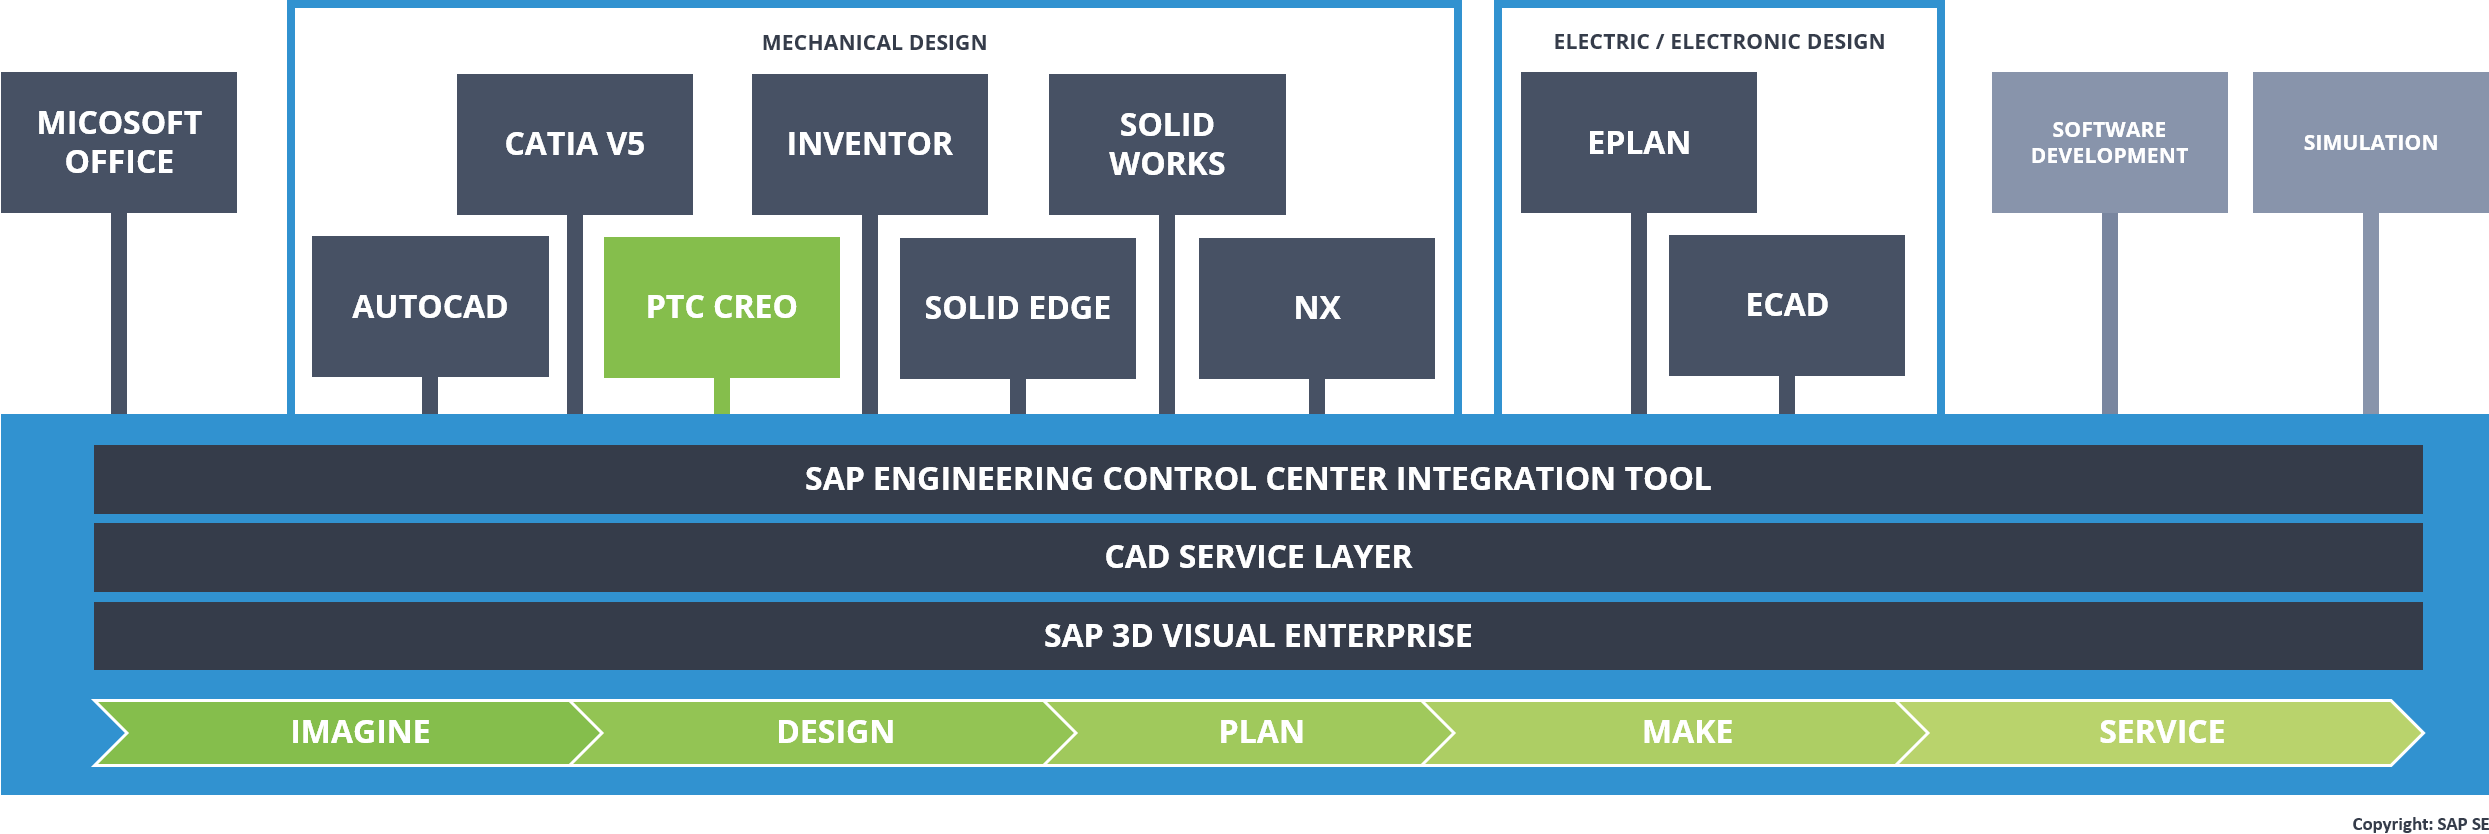 Architecture of the Engineering Control Center and the CAD integrations